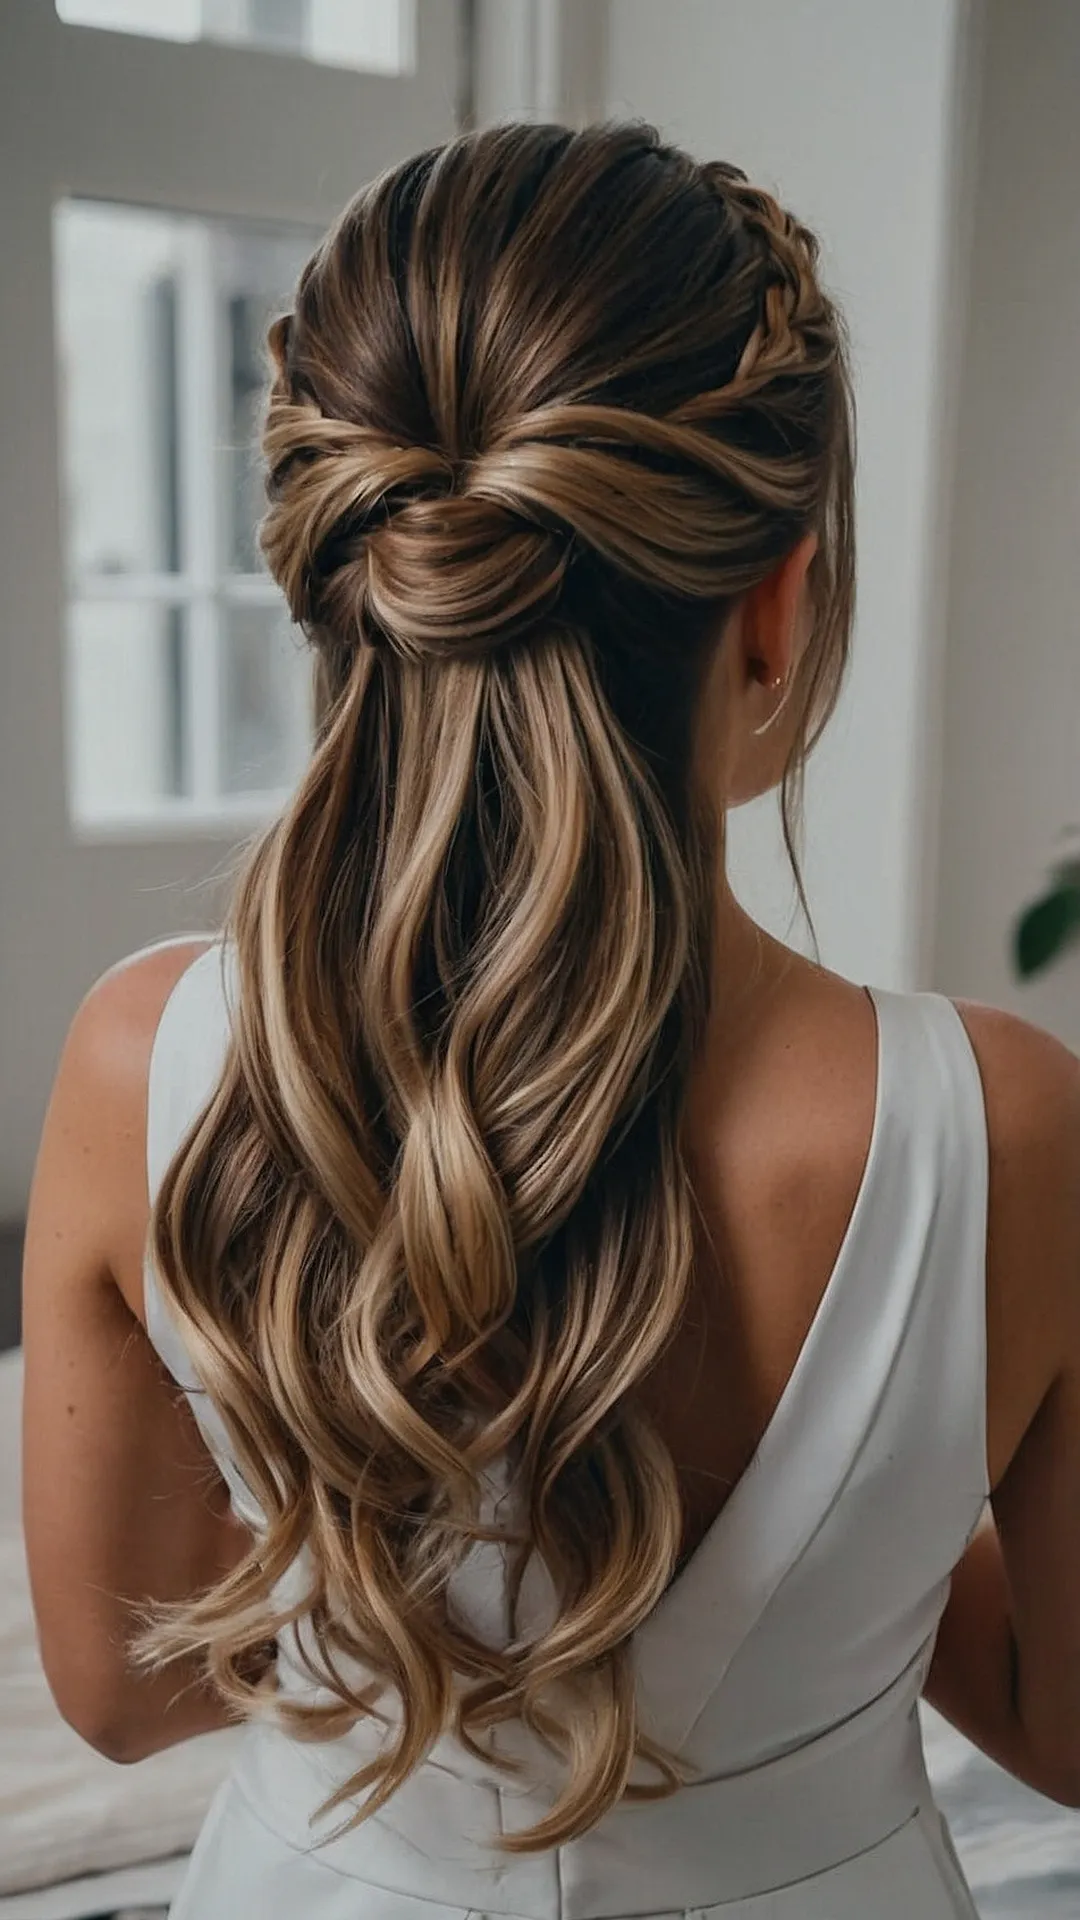 Celebrate in Style: Graduation Hairstyle Ideas